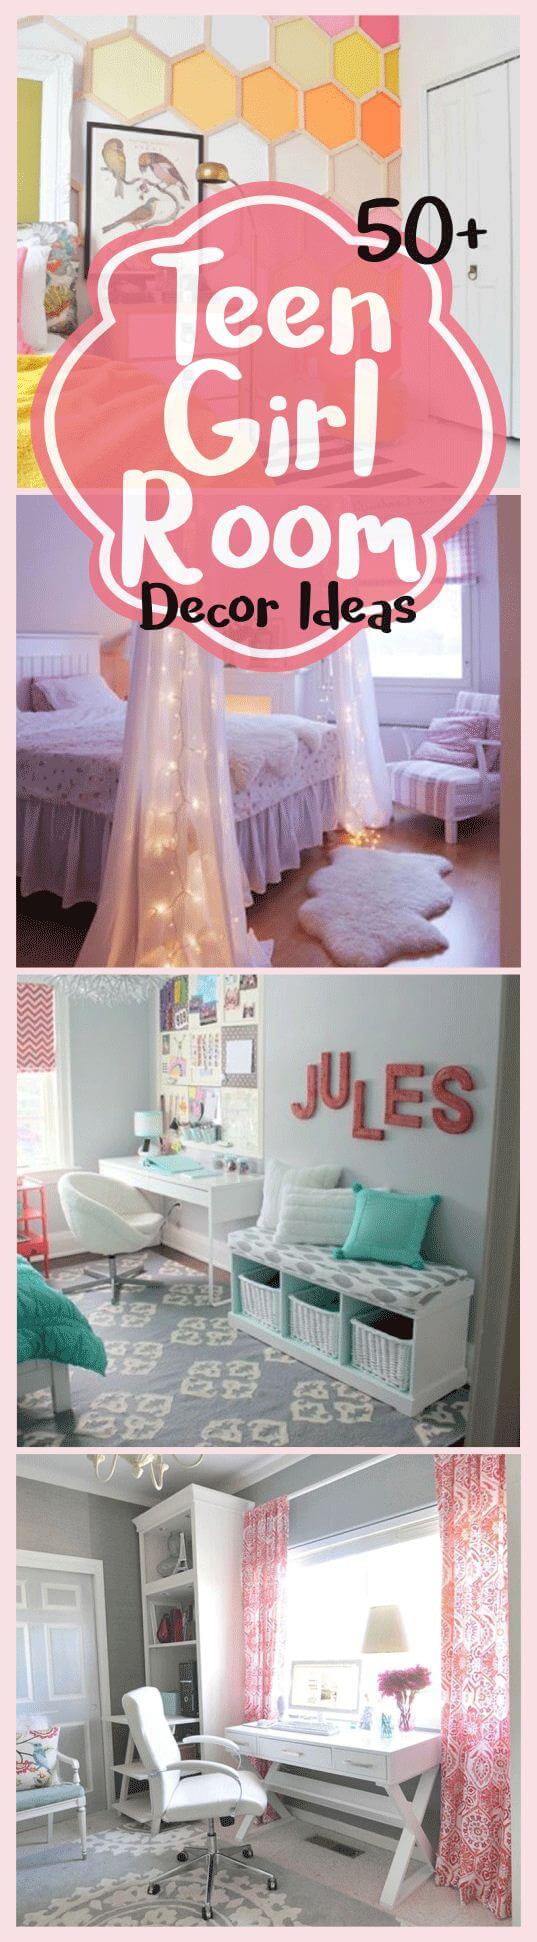 bedroom themes for teen girls